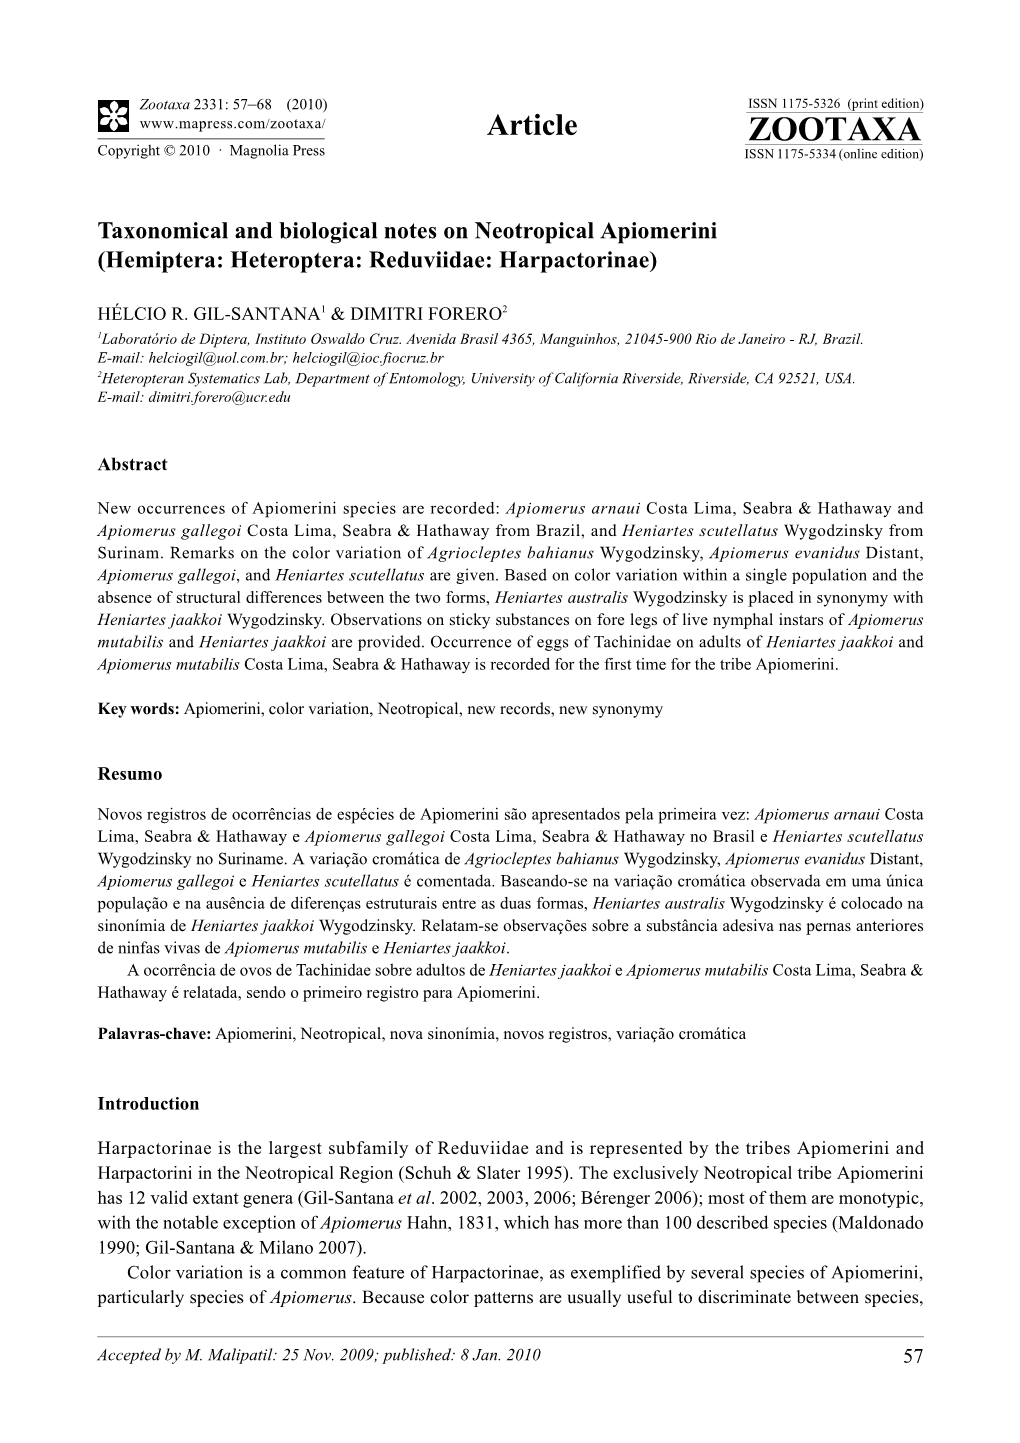 Zootaxa, Taxonomical and Biological Notes on Neotropical Apiomerini